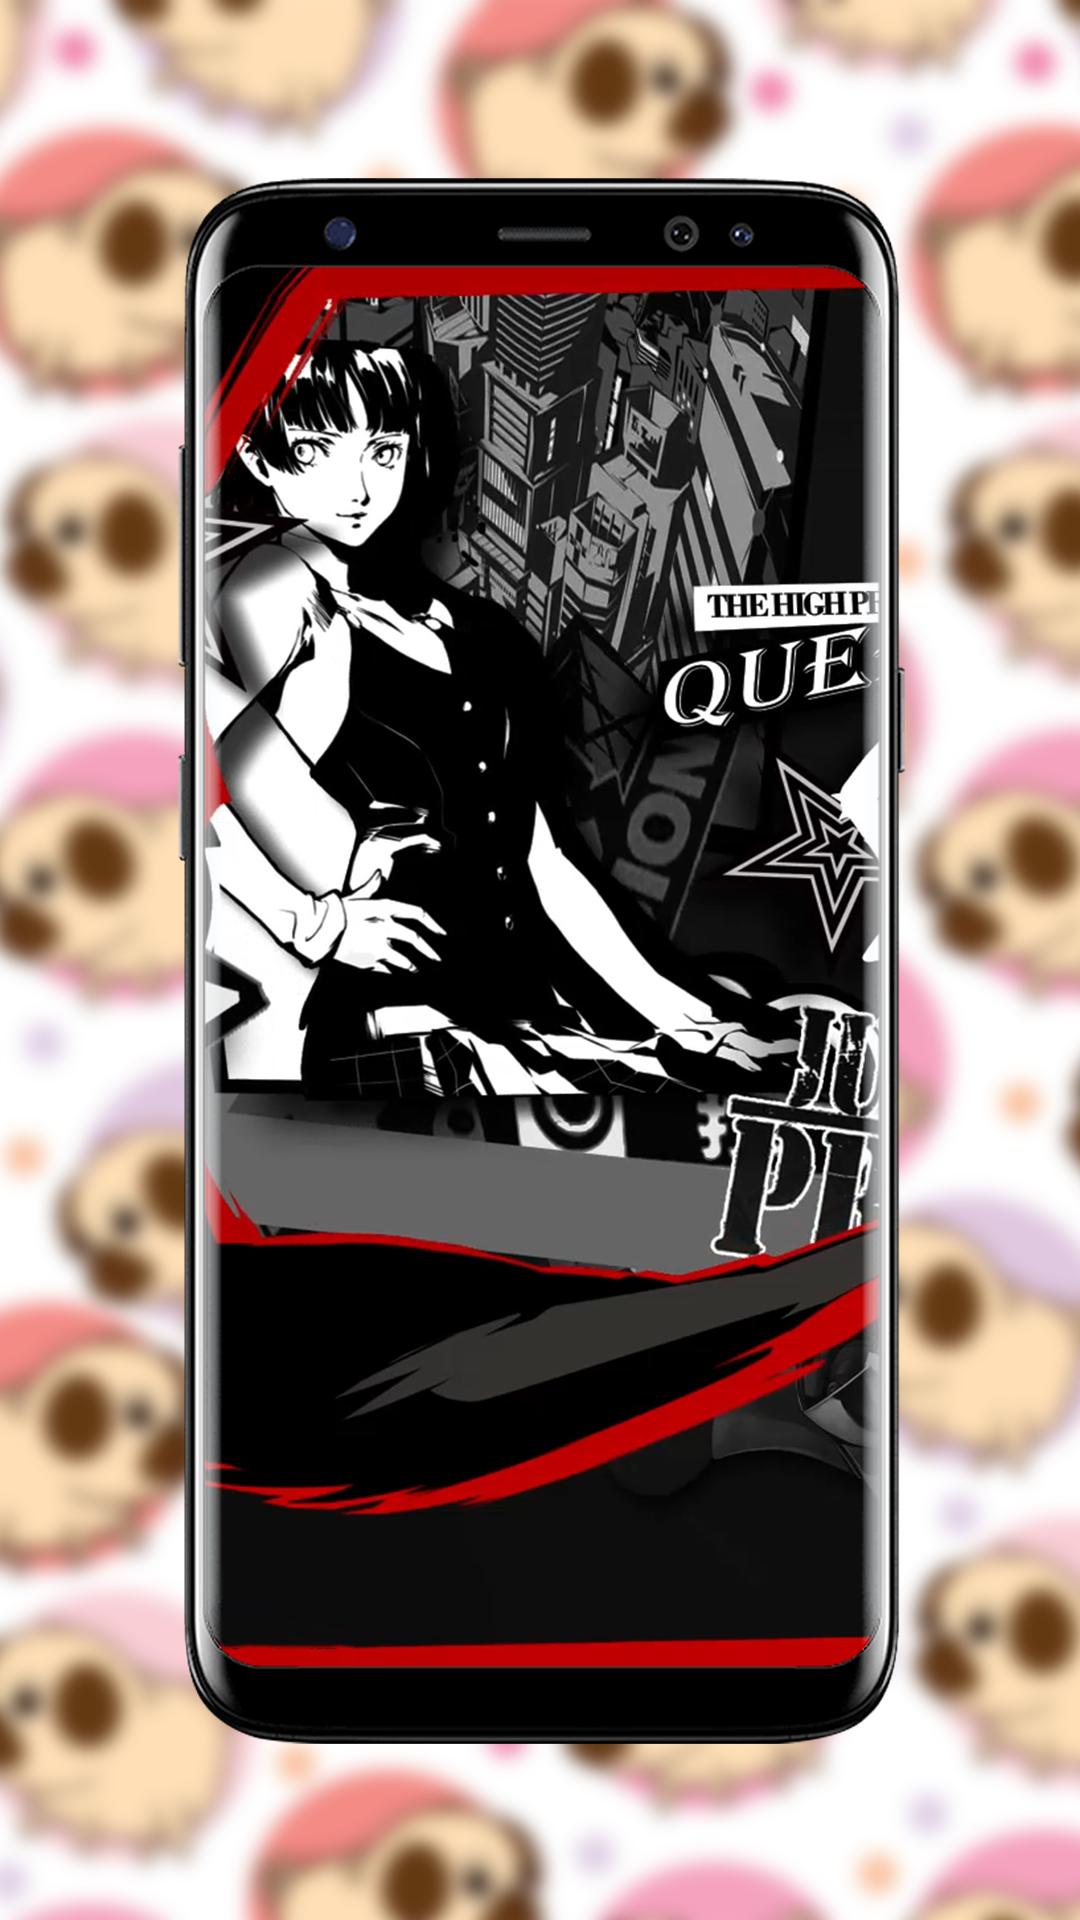 Persona 5 Live Wallpaper - A collection of the top 60 persona 5 4k